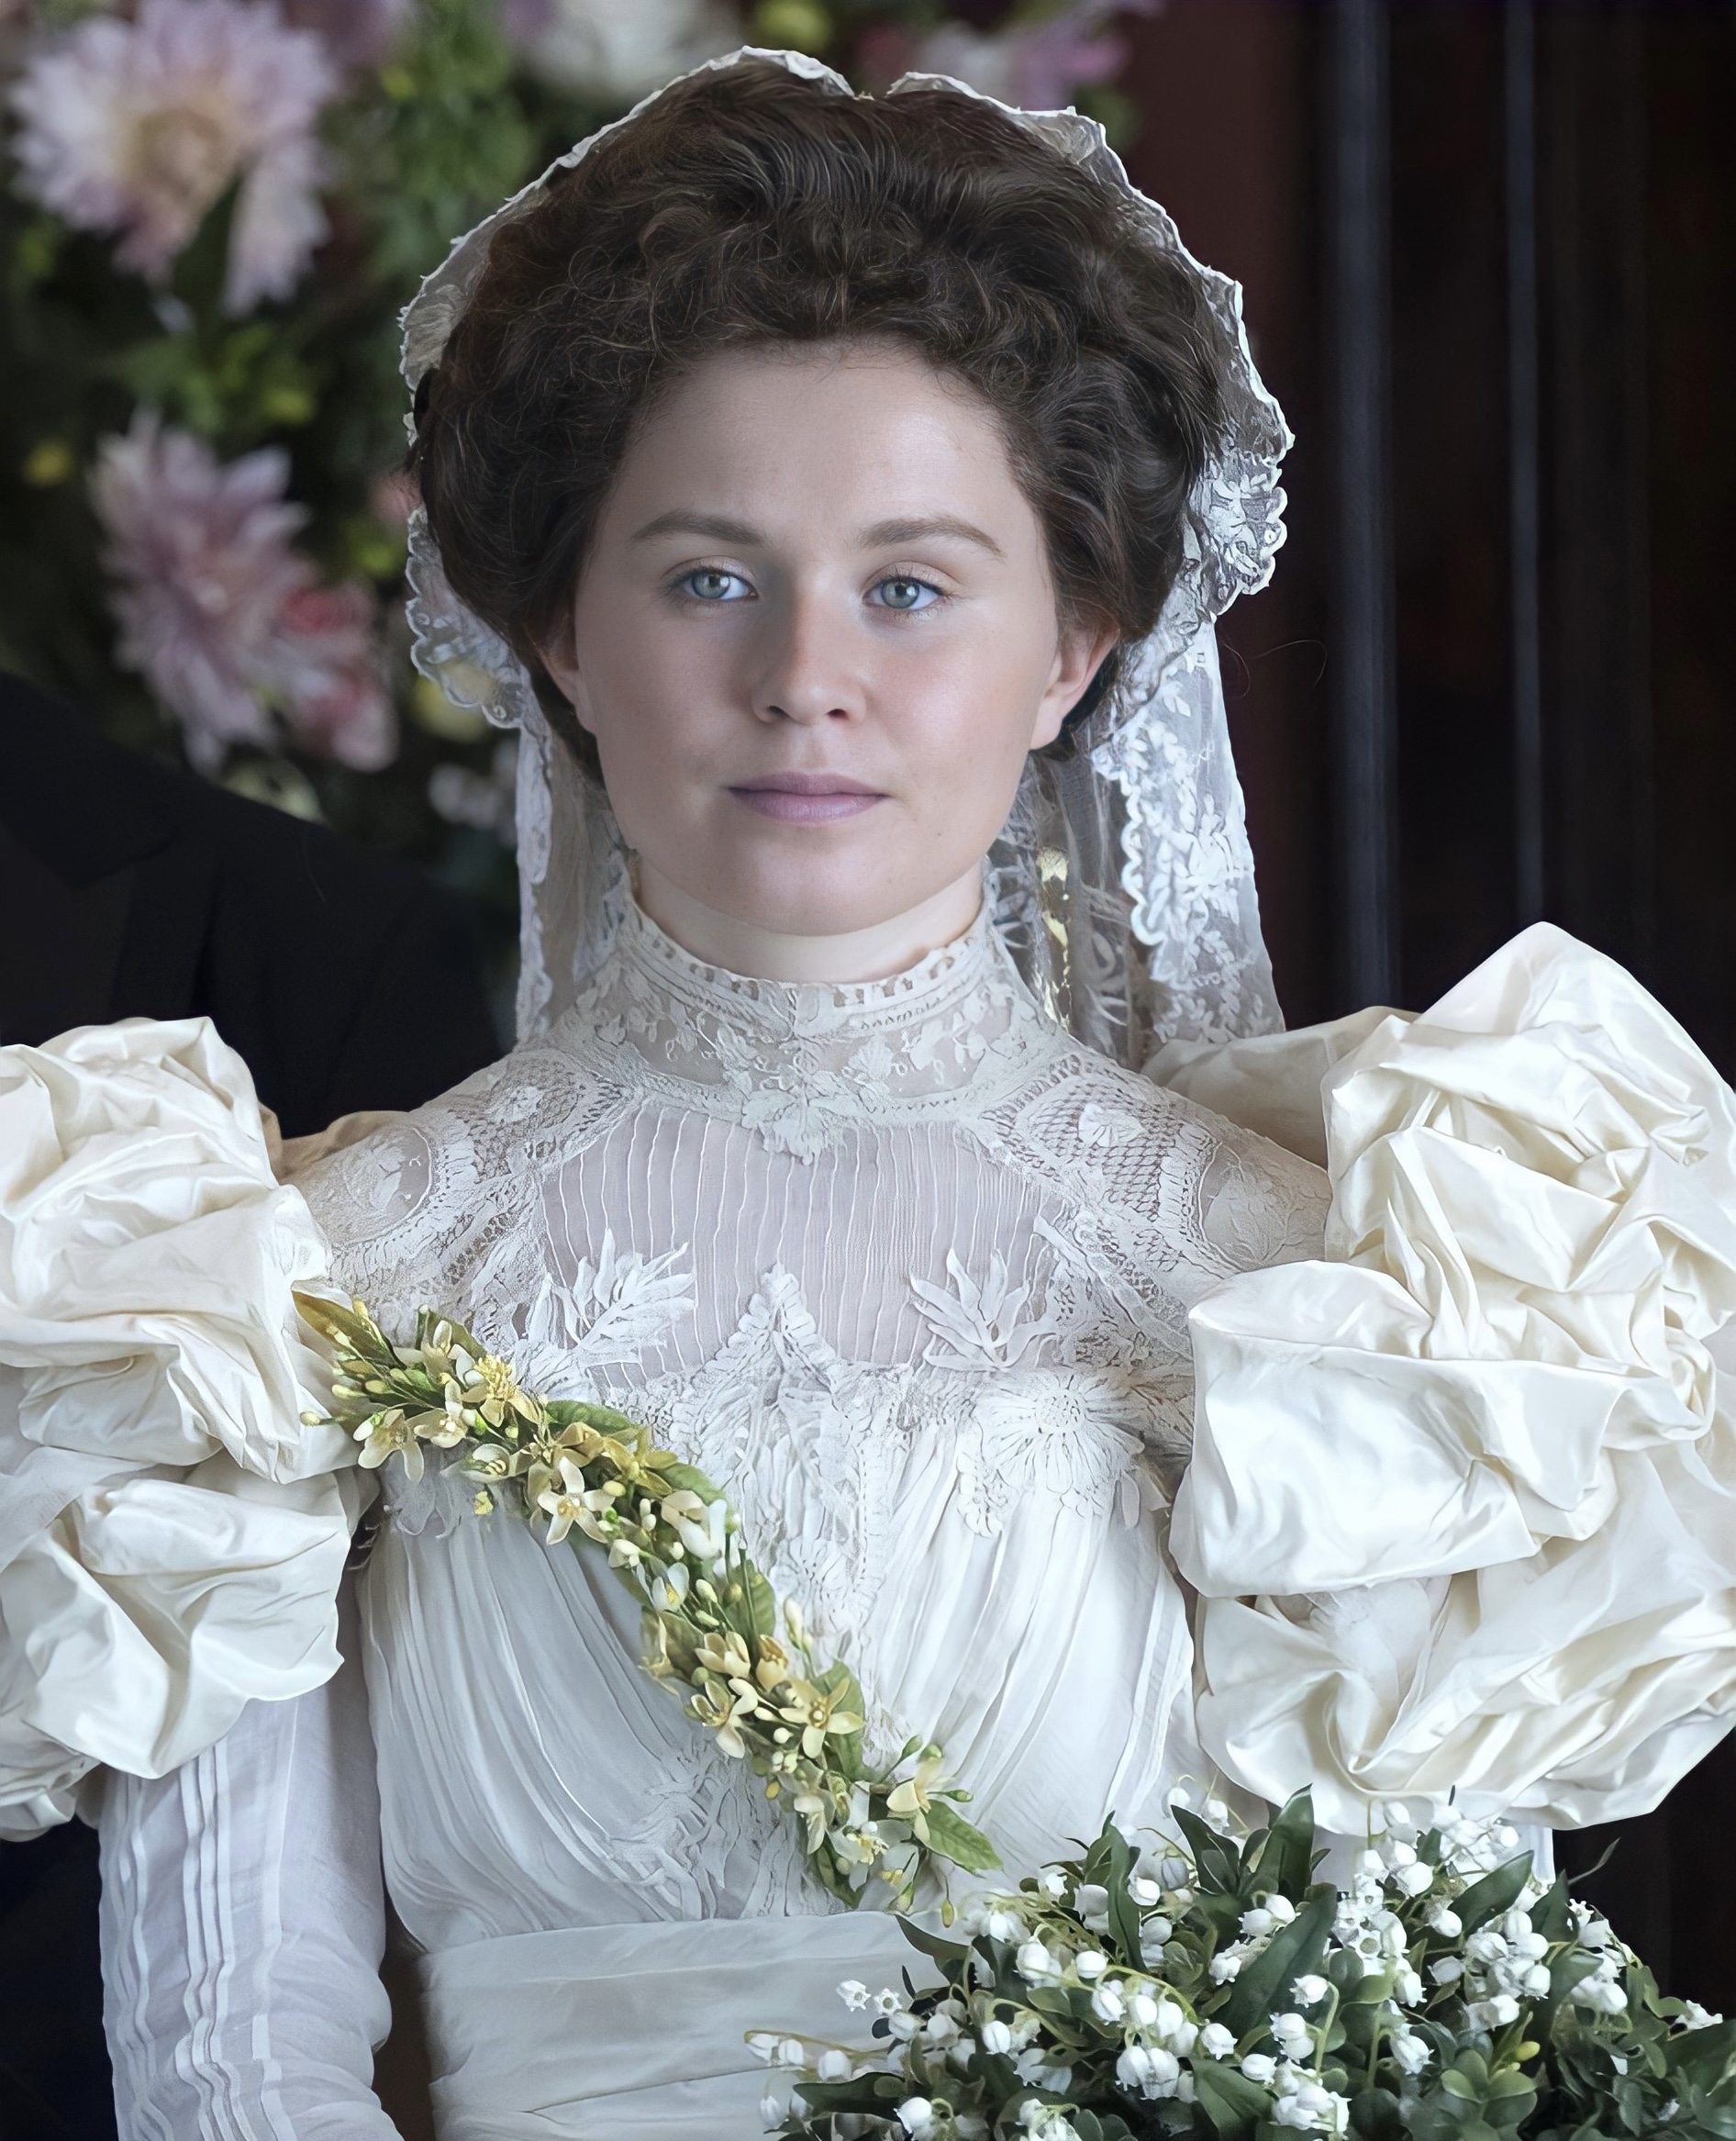 Eliza Scanlen as young Eleonore Roosevelt in The First Lady